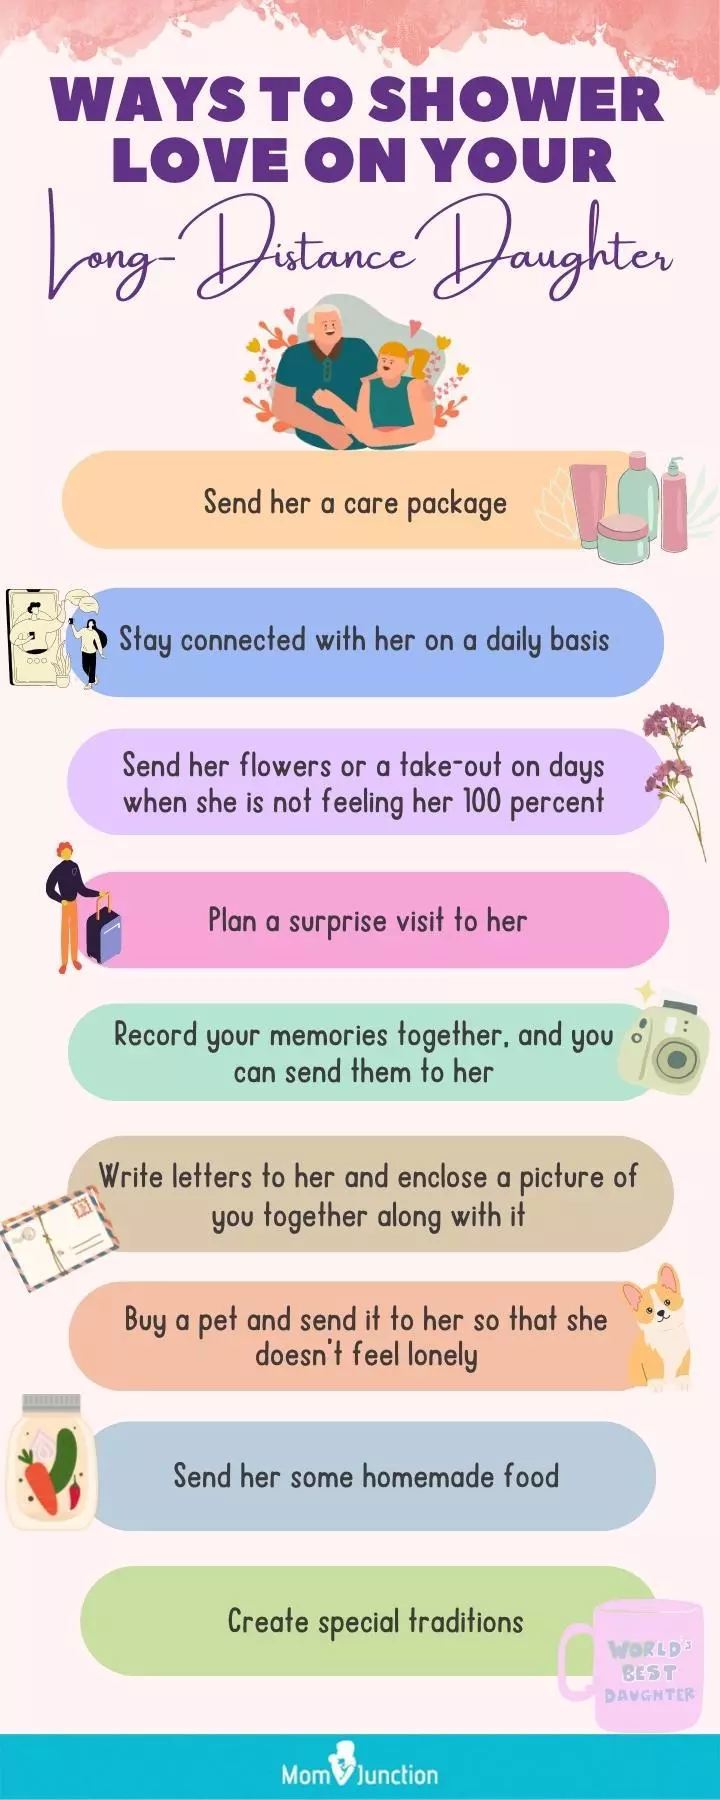 ways to shower your love on daughter (infographic)